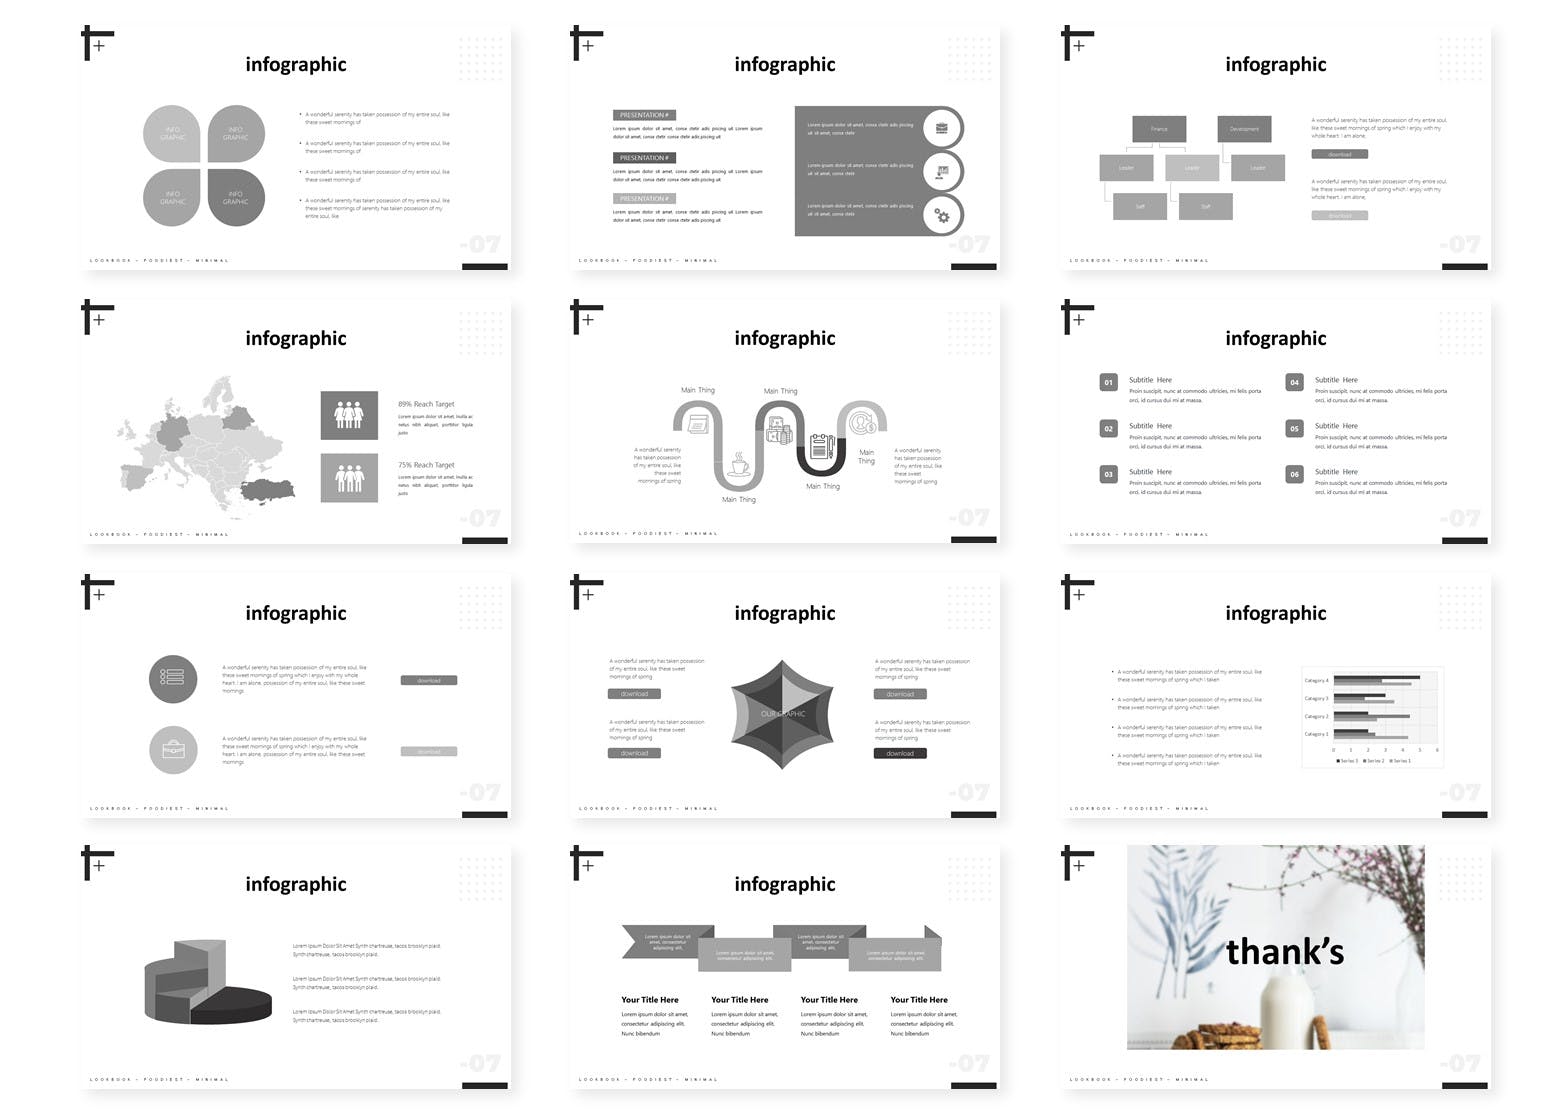 So many slides with infographics.